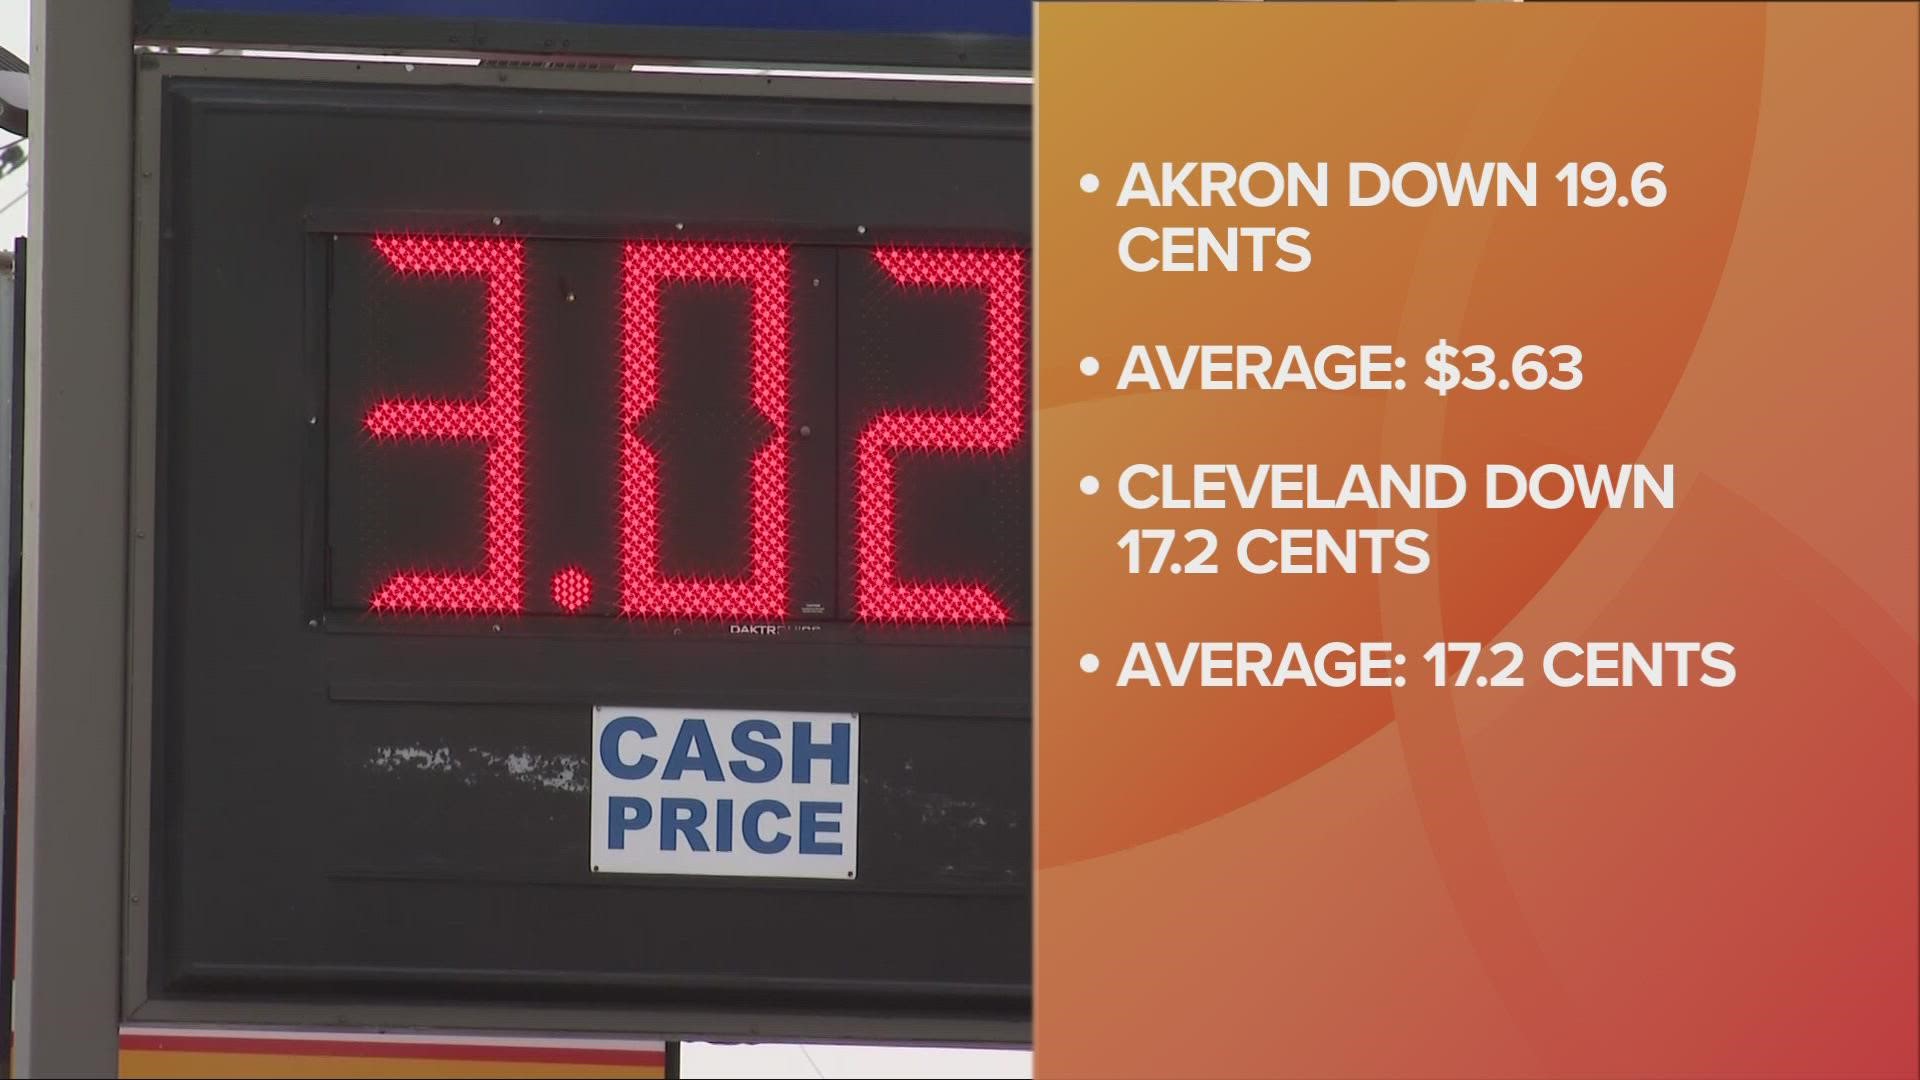 The national average also dropped 2.6 cents per gallon to $3.76, according to GasBuddy.